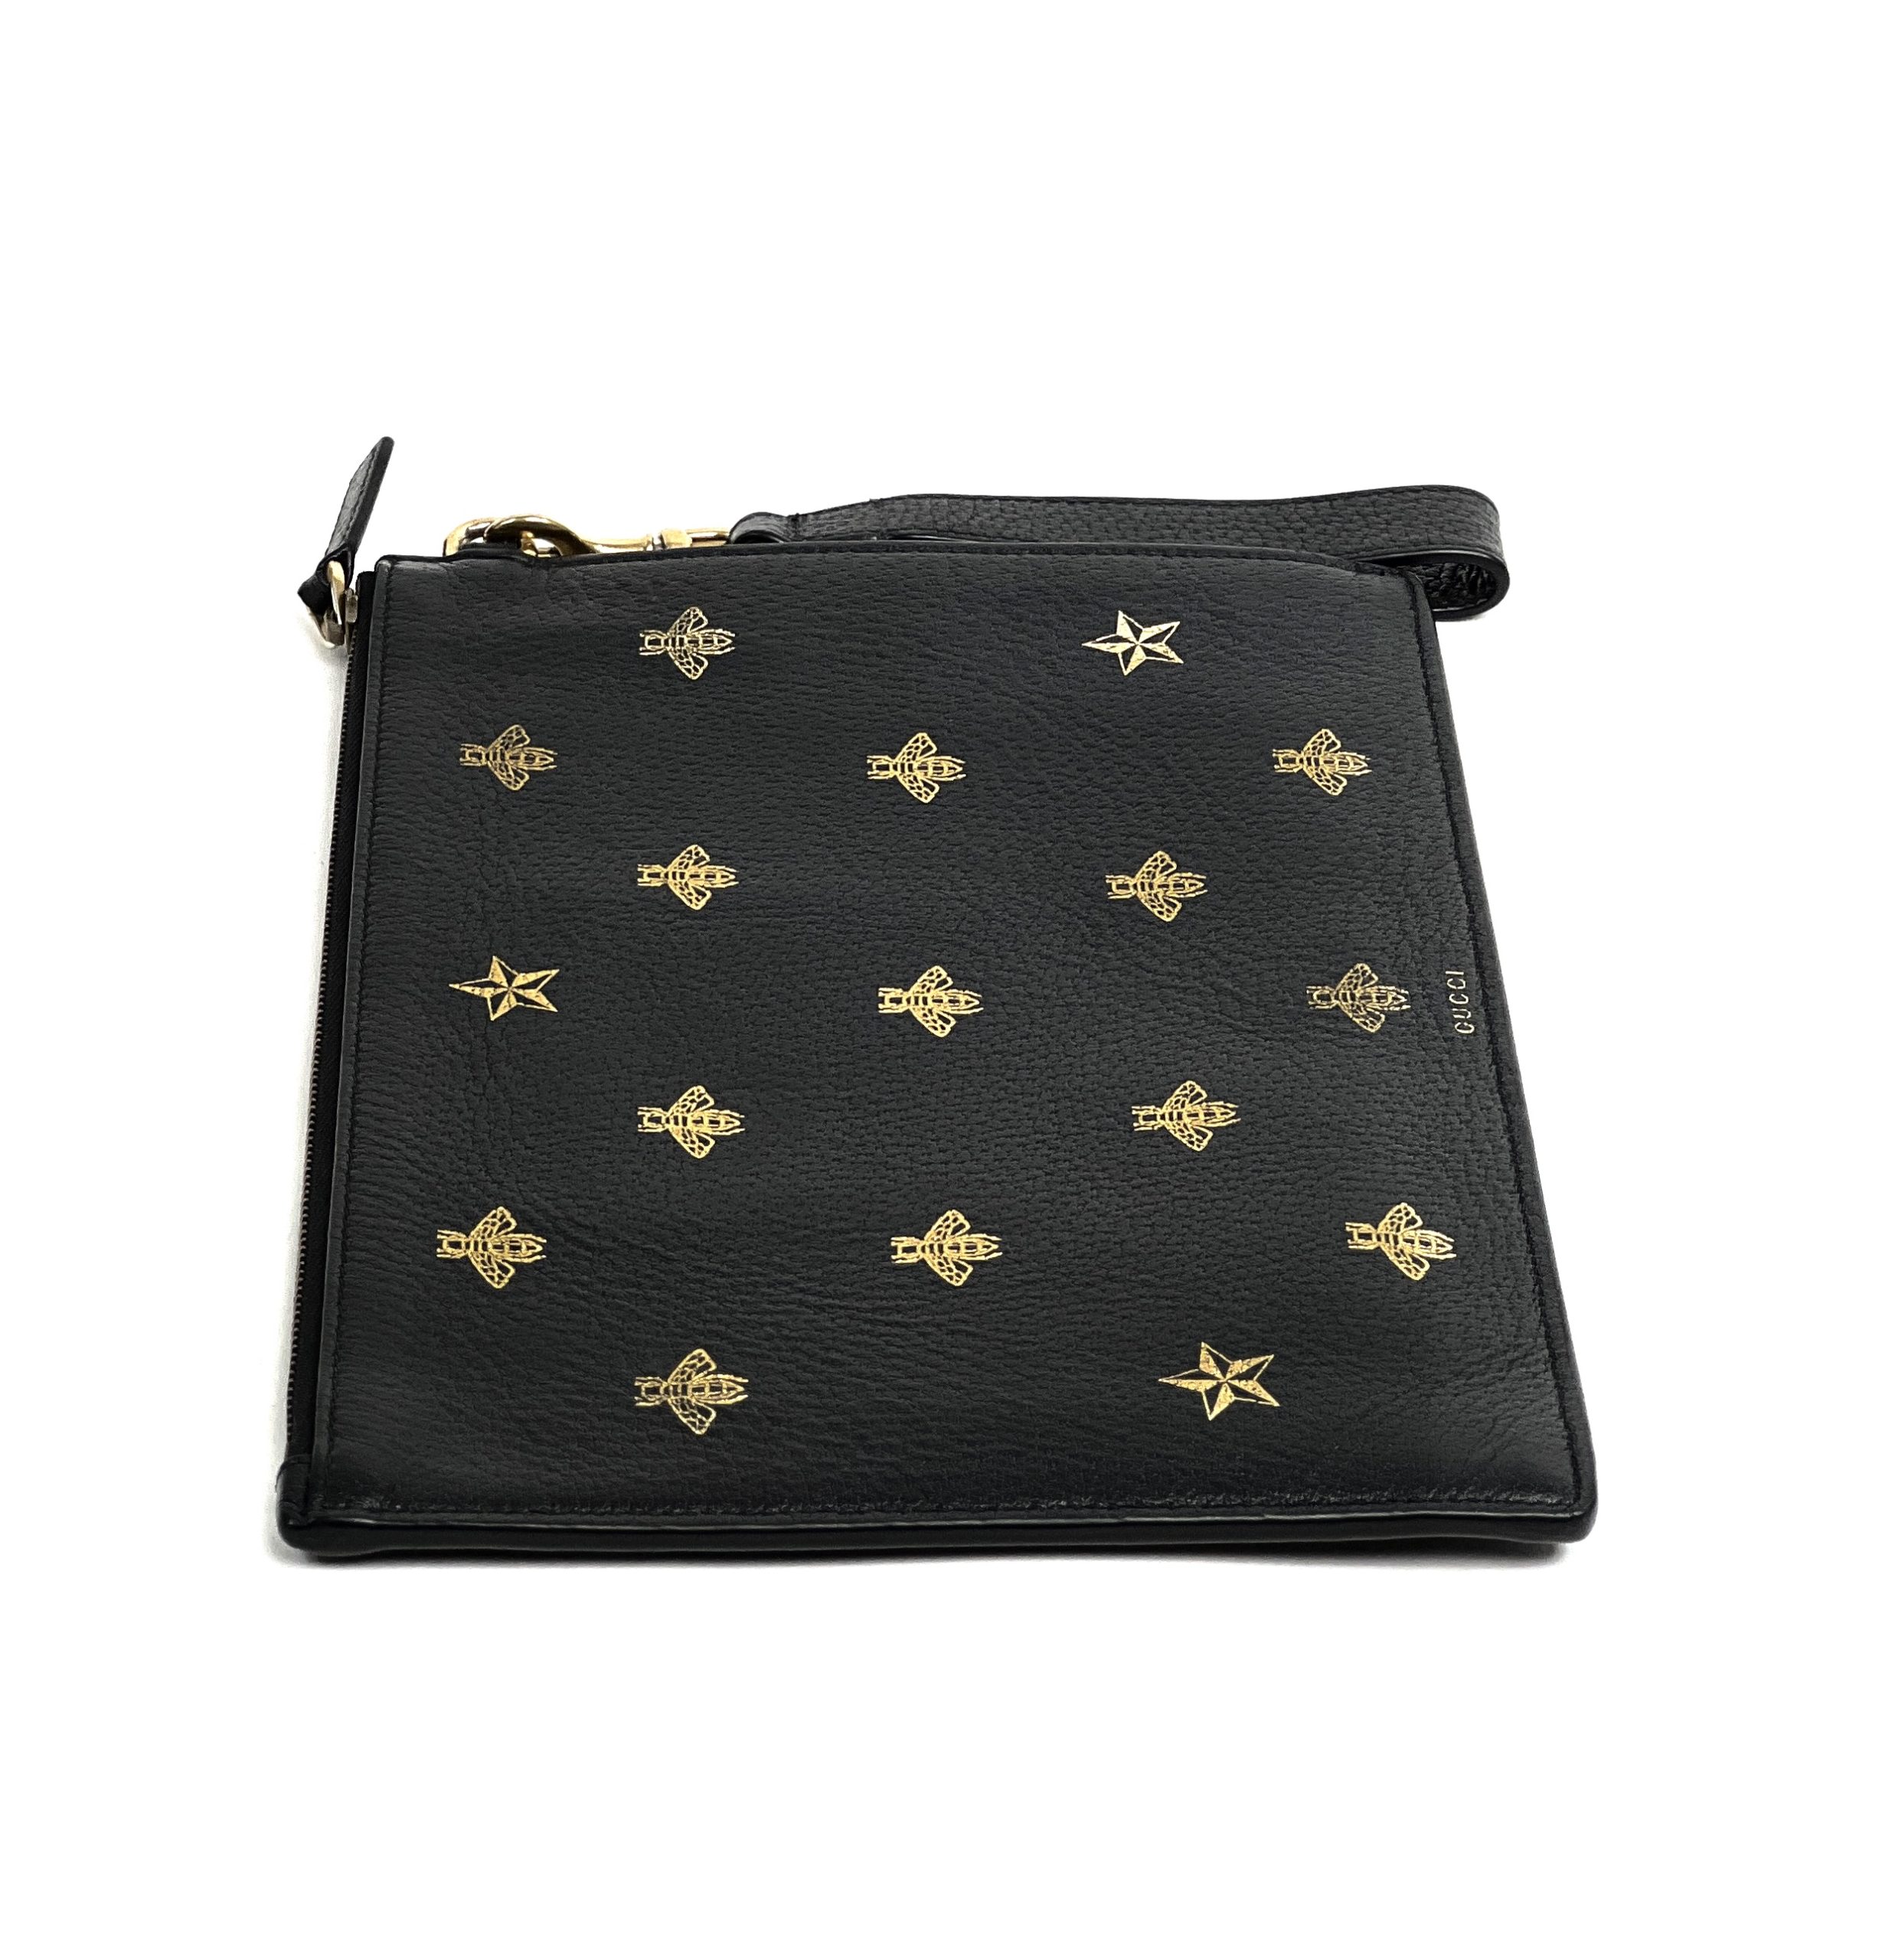 Gucci Animalier Bee Embroidered Pouch Clutch Bag